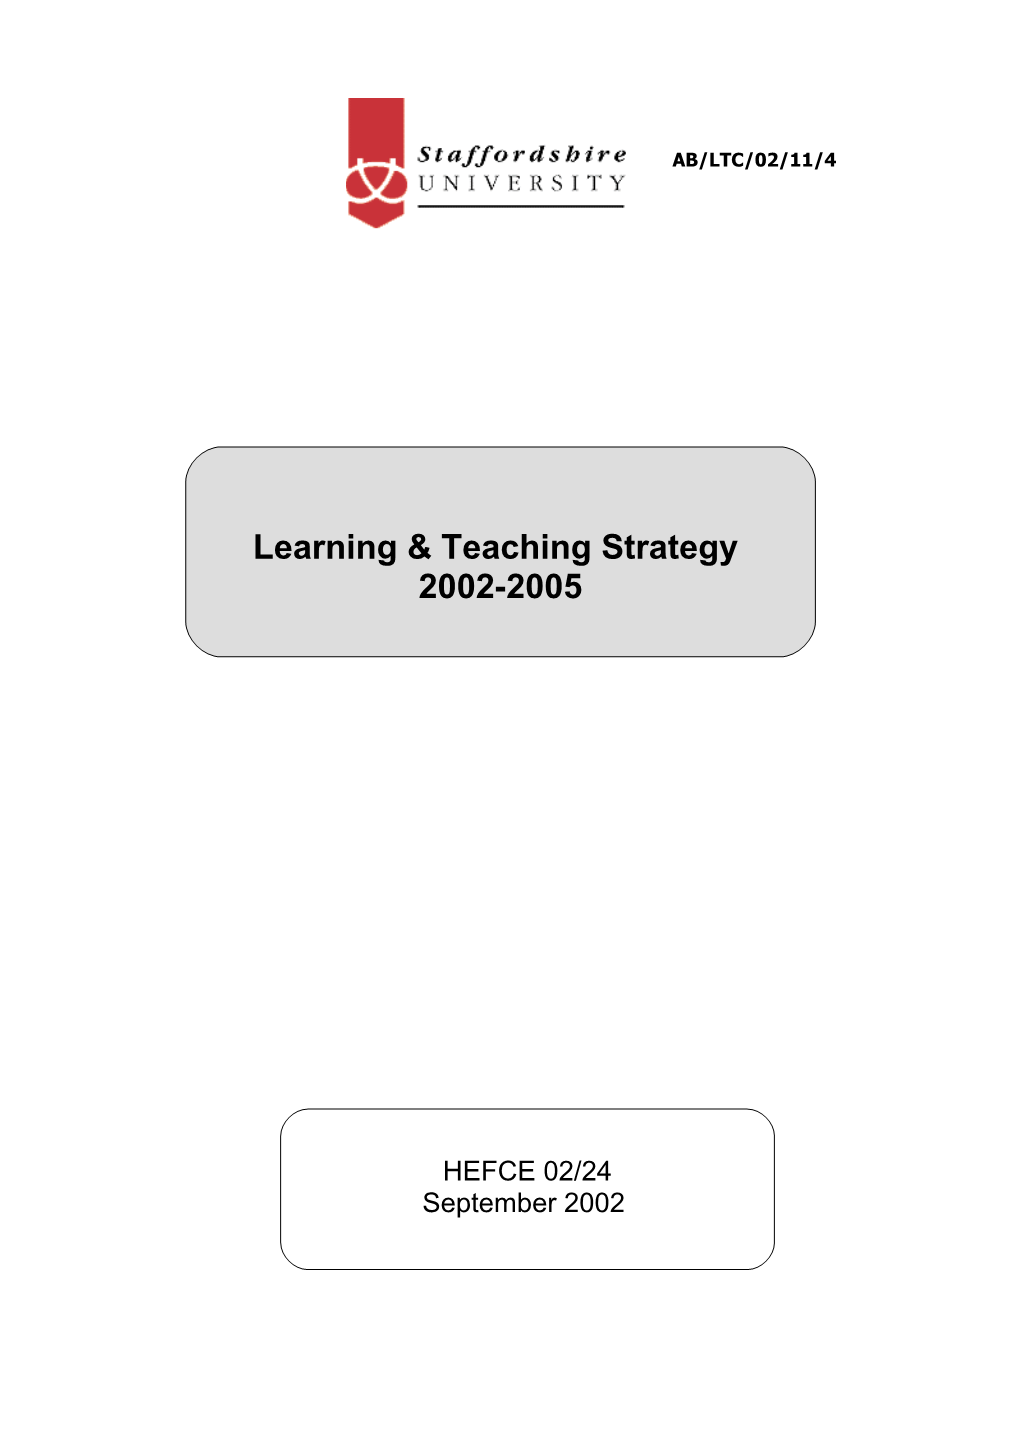 Context for the Revised Learning and Teaching Strategy